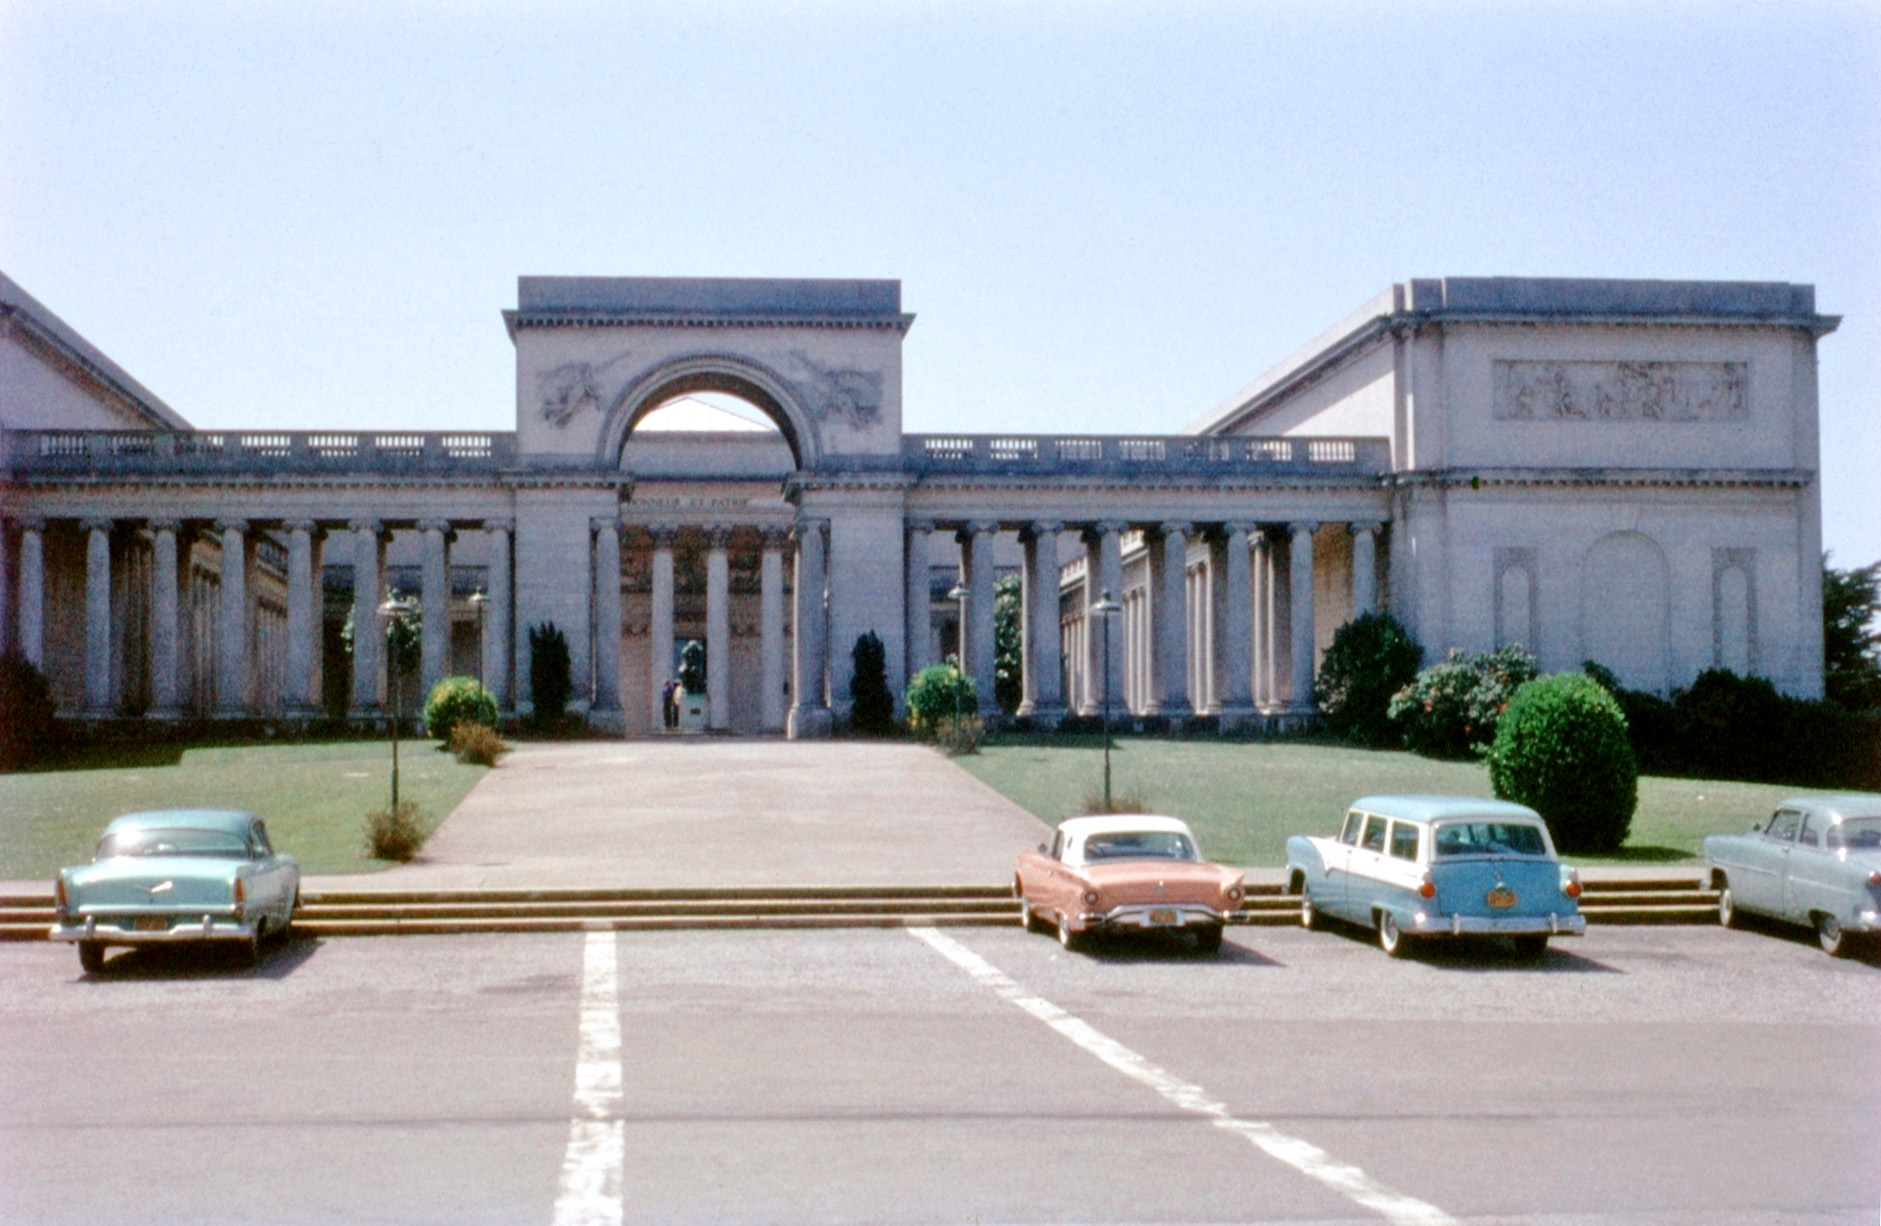 The Palace of the Legion of Honor in San Francisco, circa 1958. If I'm not mistaken, that is our blue & white 1956 Ford station wagon on the right. View full size. 